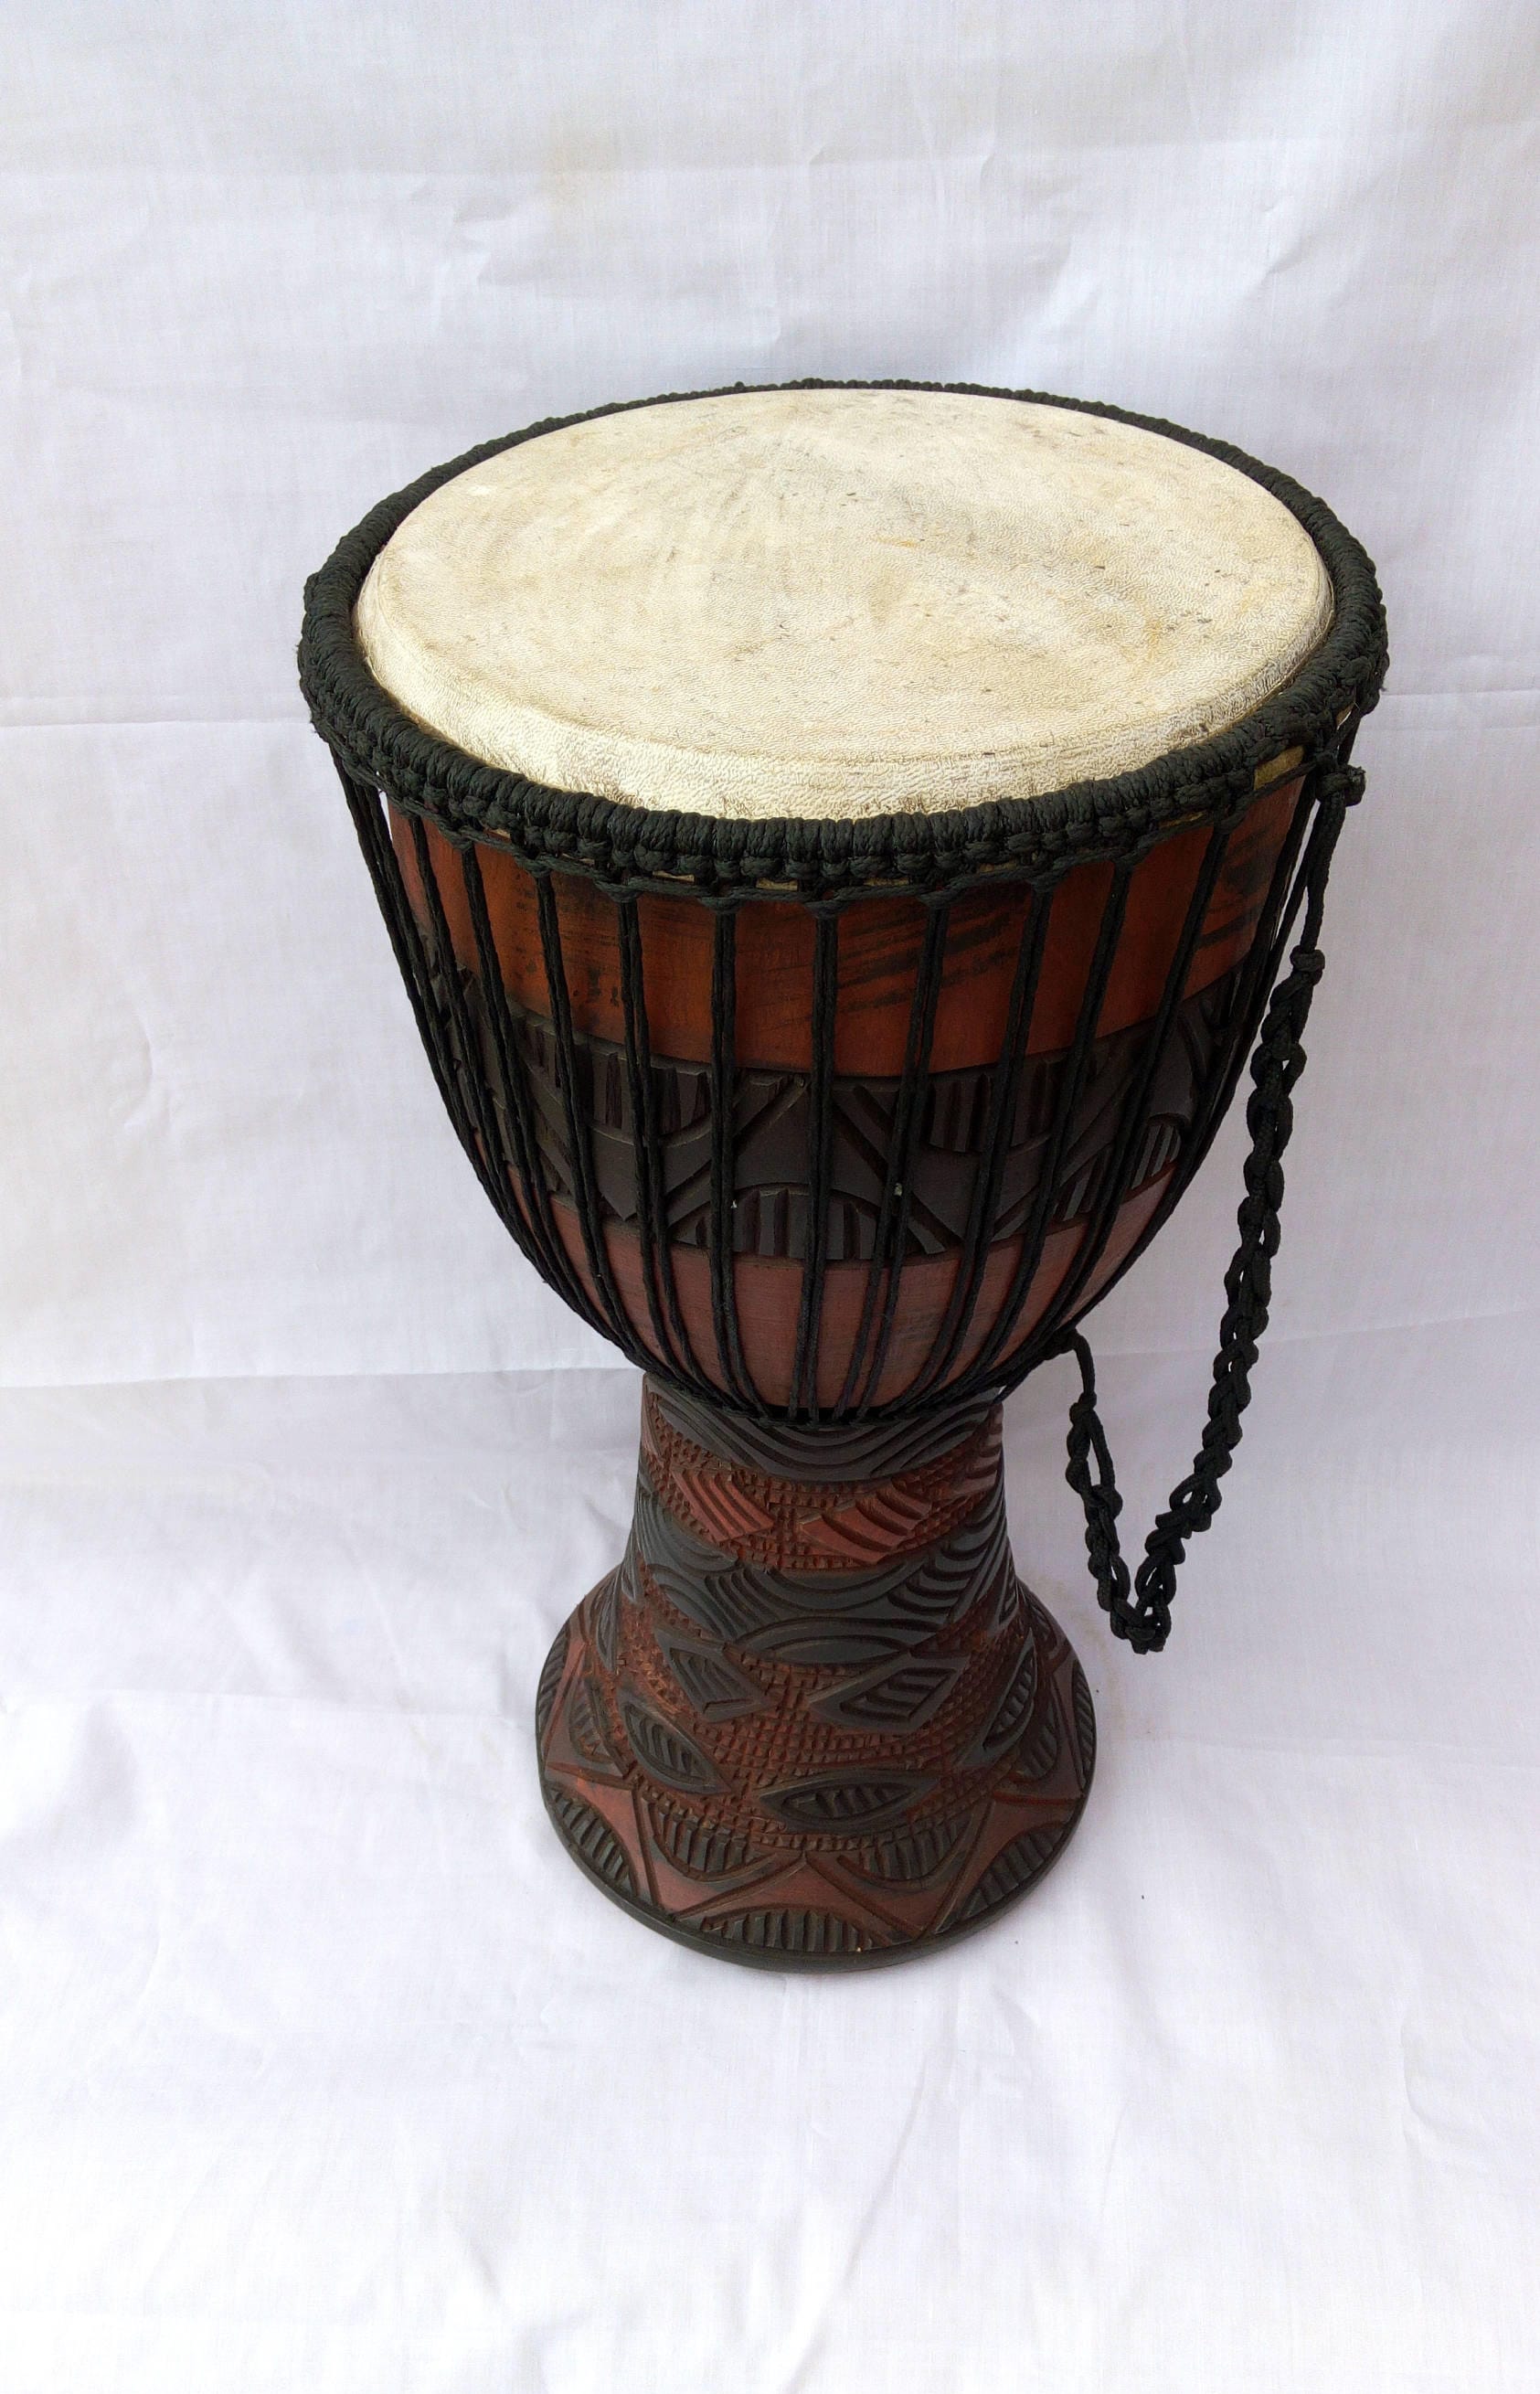 8 Inch Portable African Drum Djembe Hand Drum with Colorful Art Patterns  Percussion Musical Instrument 